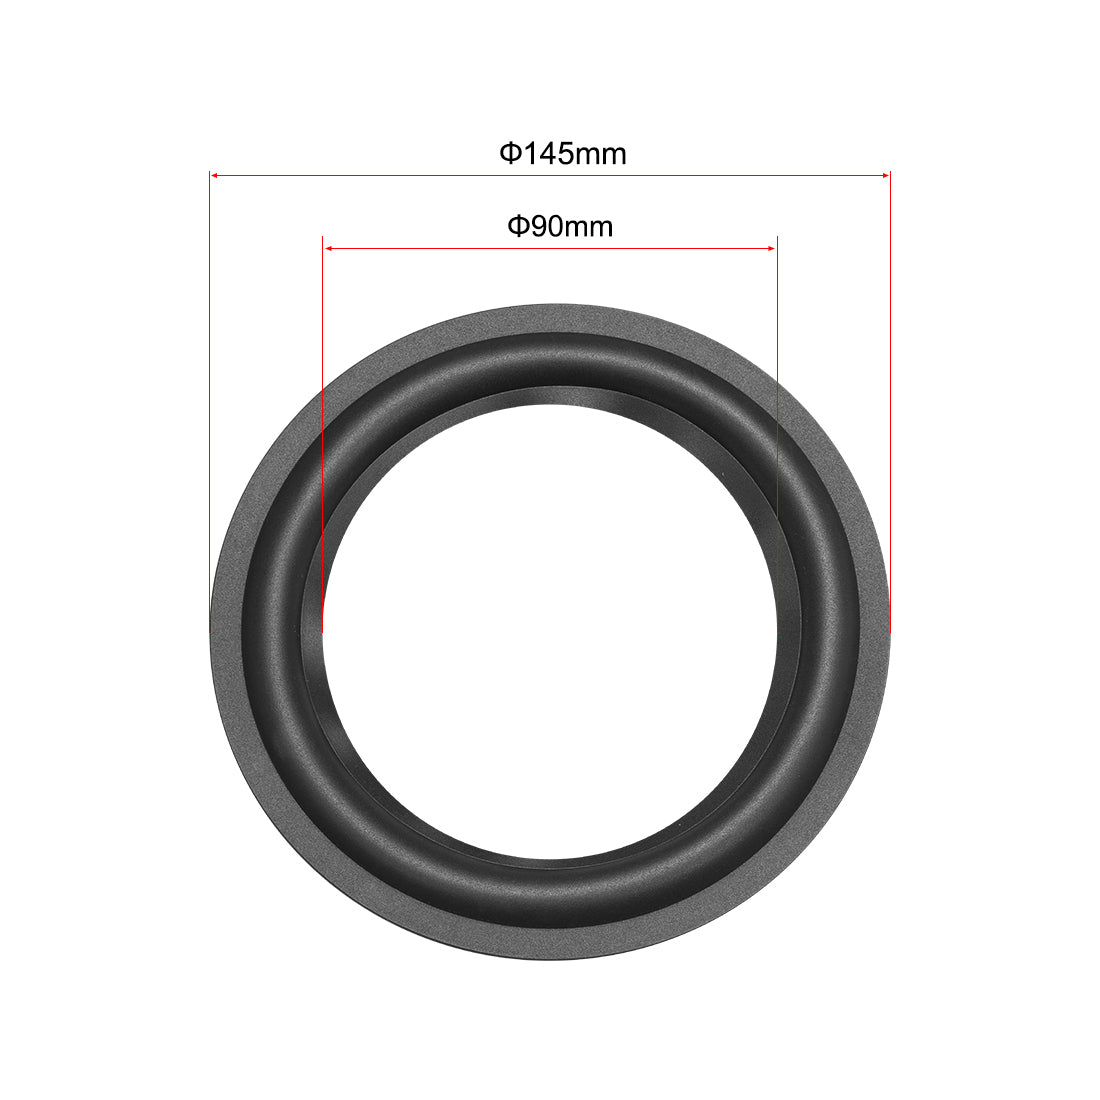 uxcell Uxcell 5.5" 5.5 Inch Speaker Rubber Edge Surround Rings Replacement Part for Speaker Repair or DIY